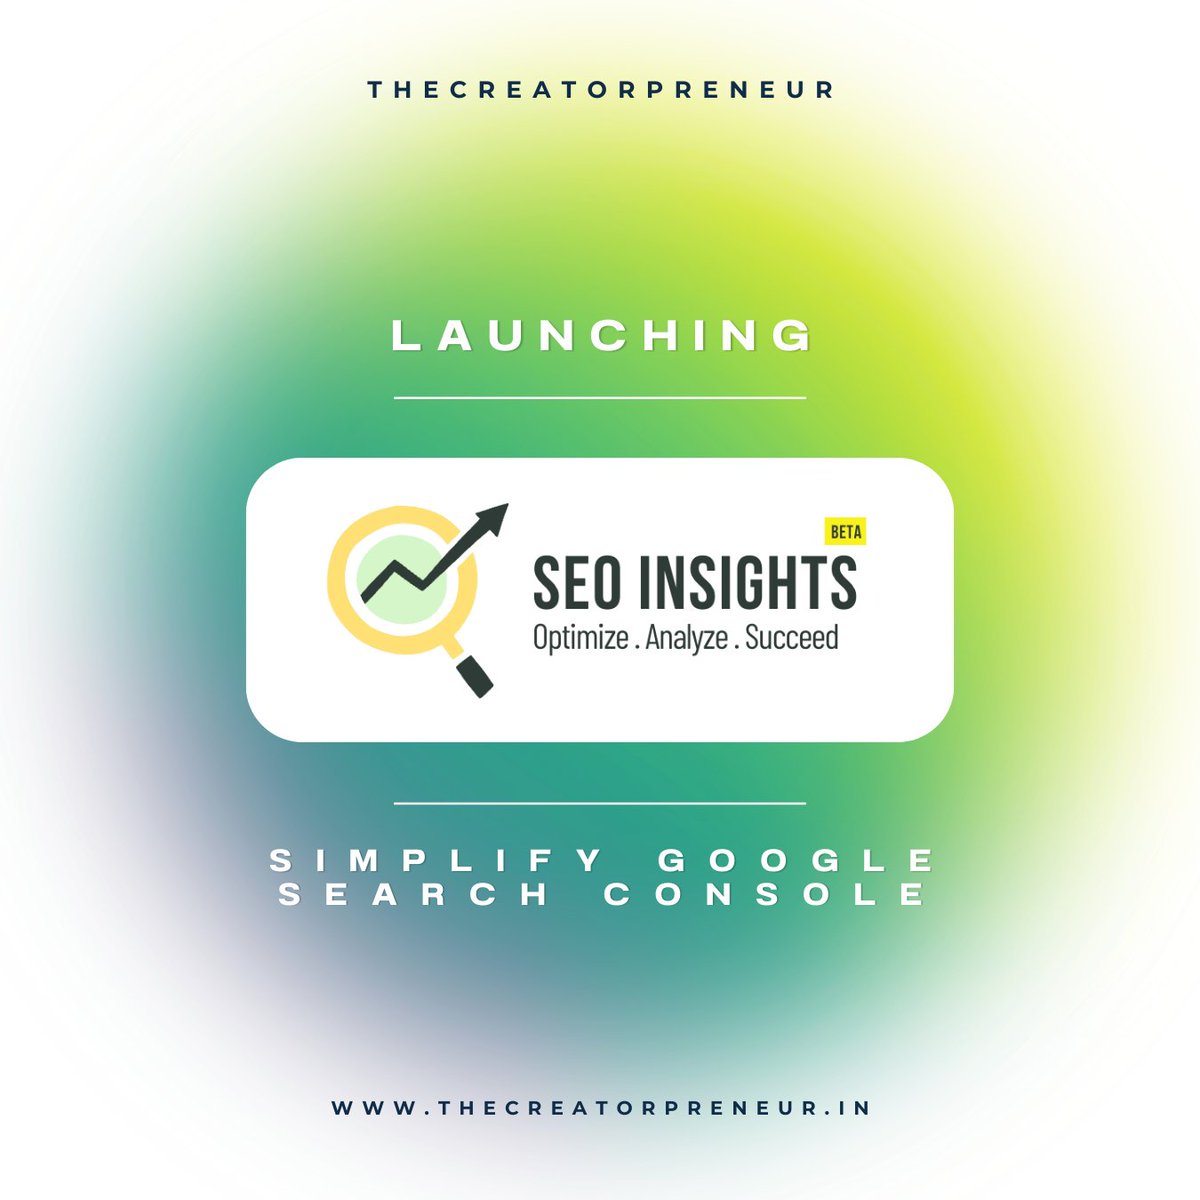 🚀 Launching SEO Insights! 🌟 
Simplify your Google Search Console data with our user-friendly dashboard. 
Get real-time SEO analytics at your fingertips. 
Transform your website's performance today! 
#SEOInsights #DigitalMarketing #GoogleSEO 📈💡  

thecreatorpreneur.in/seo-insights/